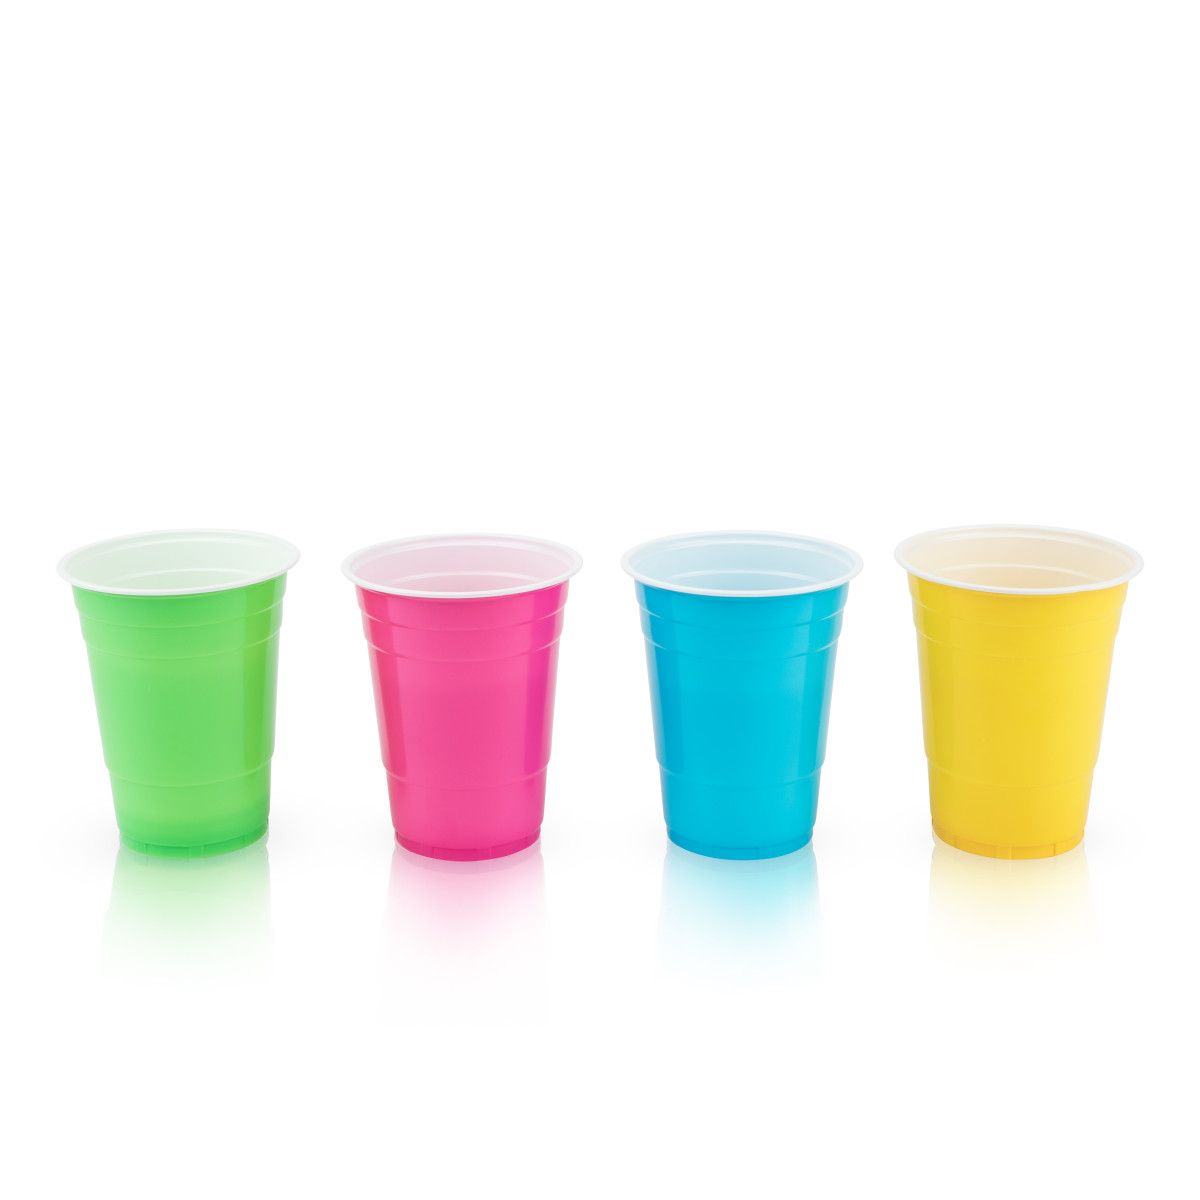 Blendin 4 Pack 16 Ounce Party Mugs Cups with Colored Lip Rings